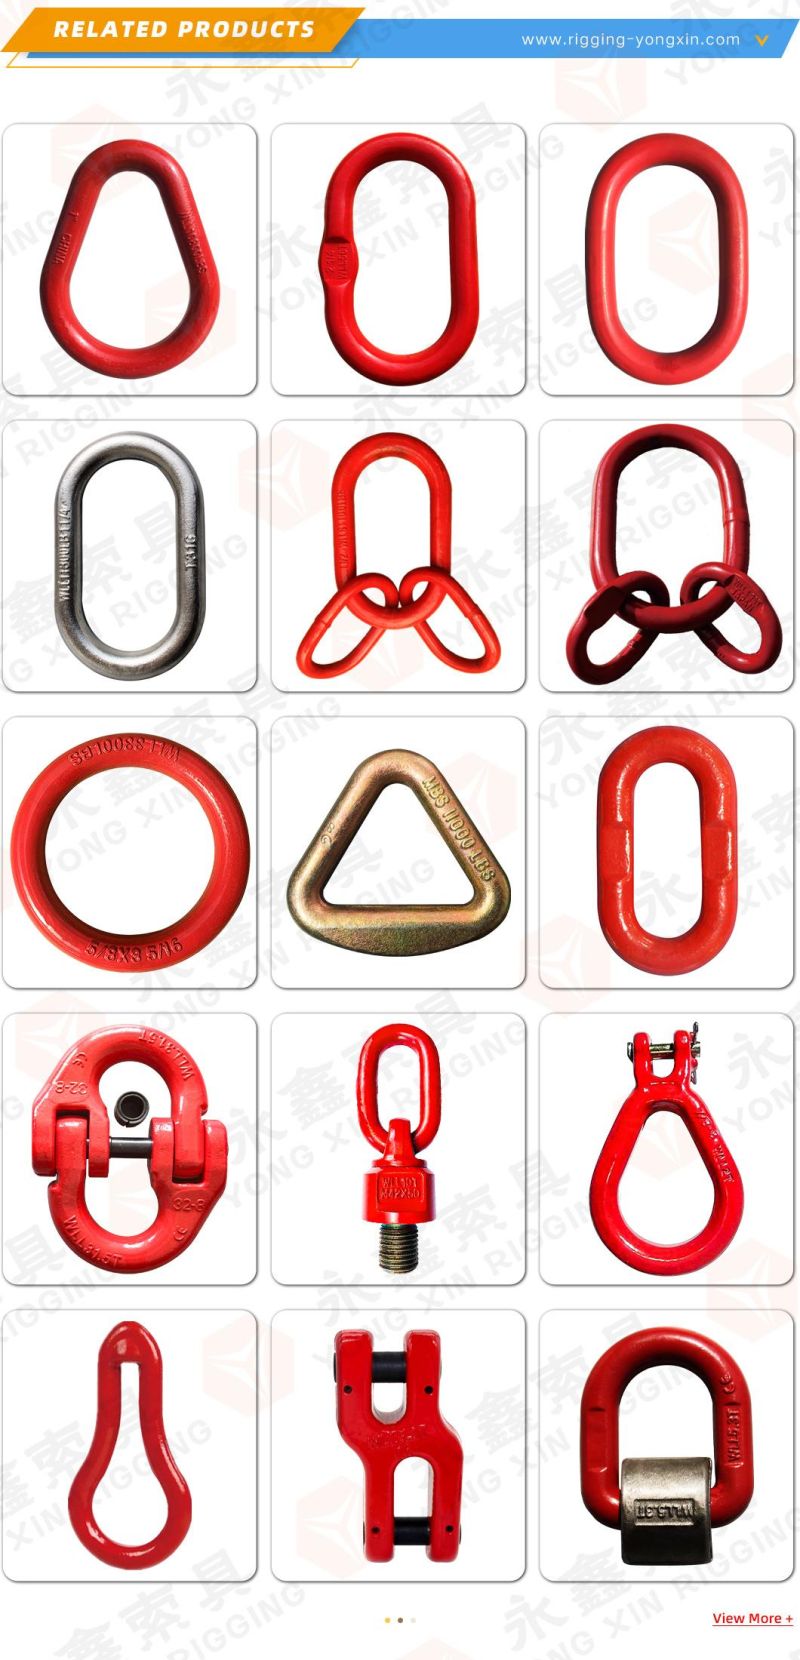 Alloy Steel Forged Pear Shape Master Lifting Link for Chain Lifting|Forged Pear Shape Link|Master Link